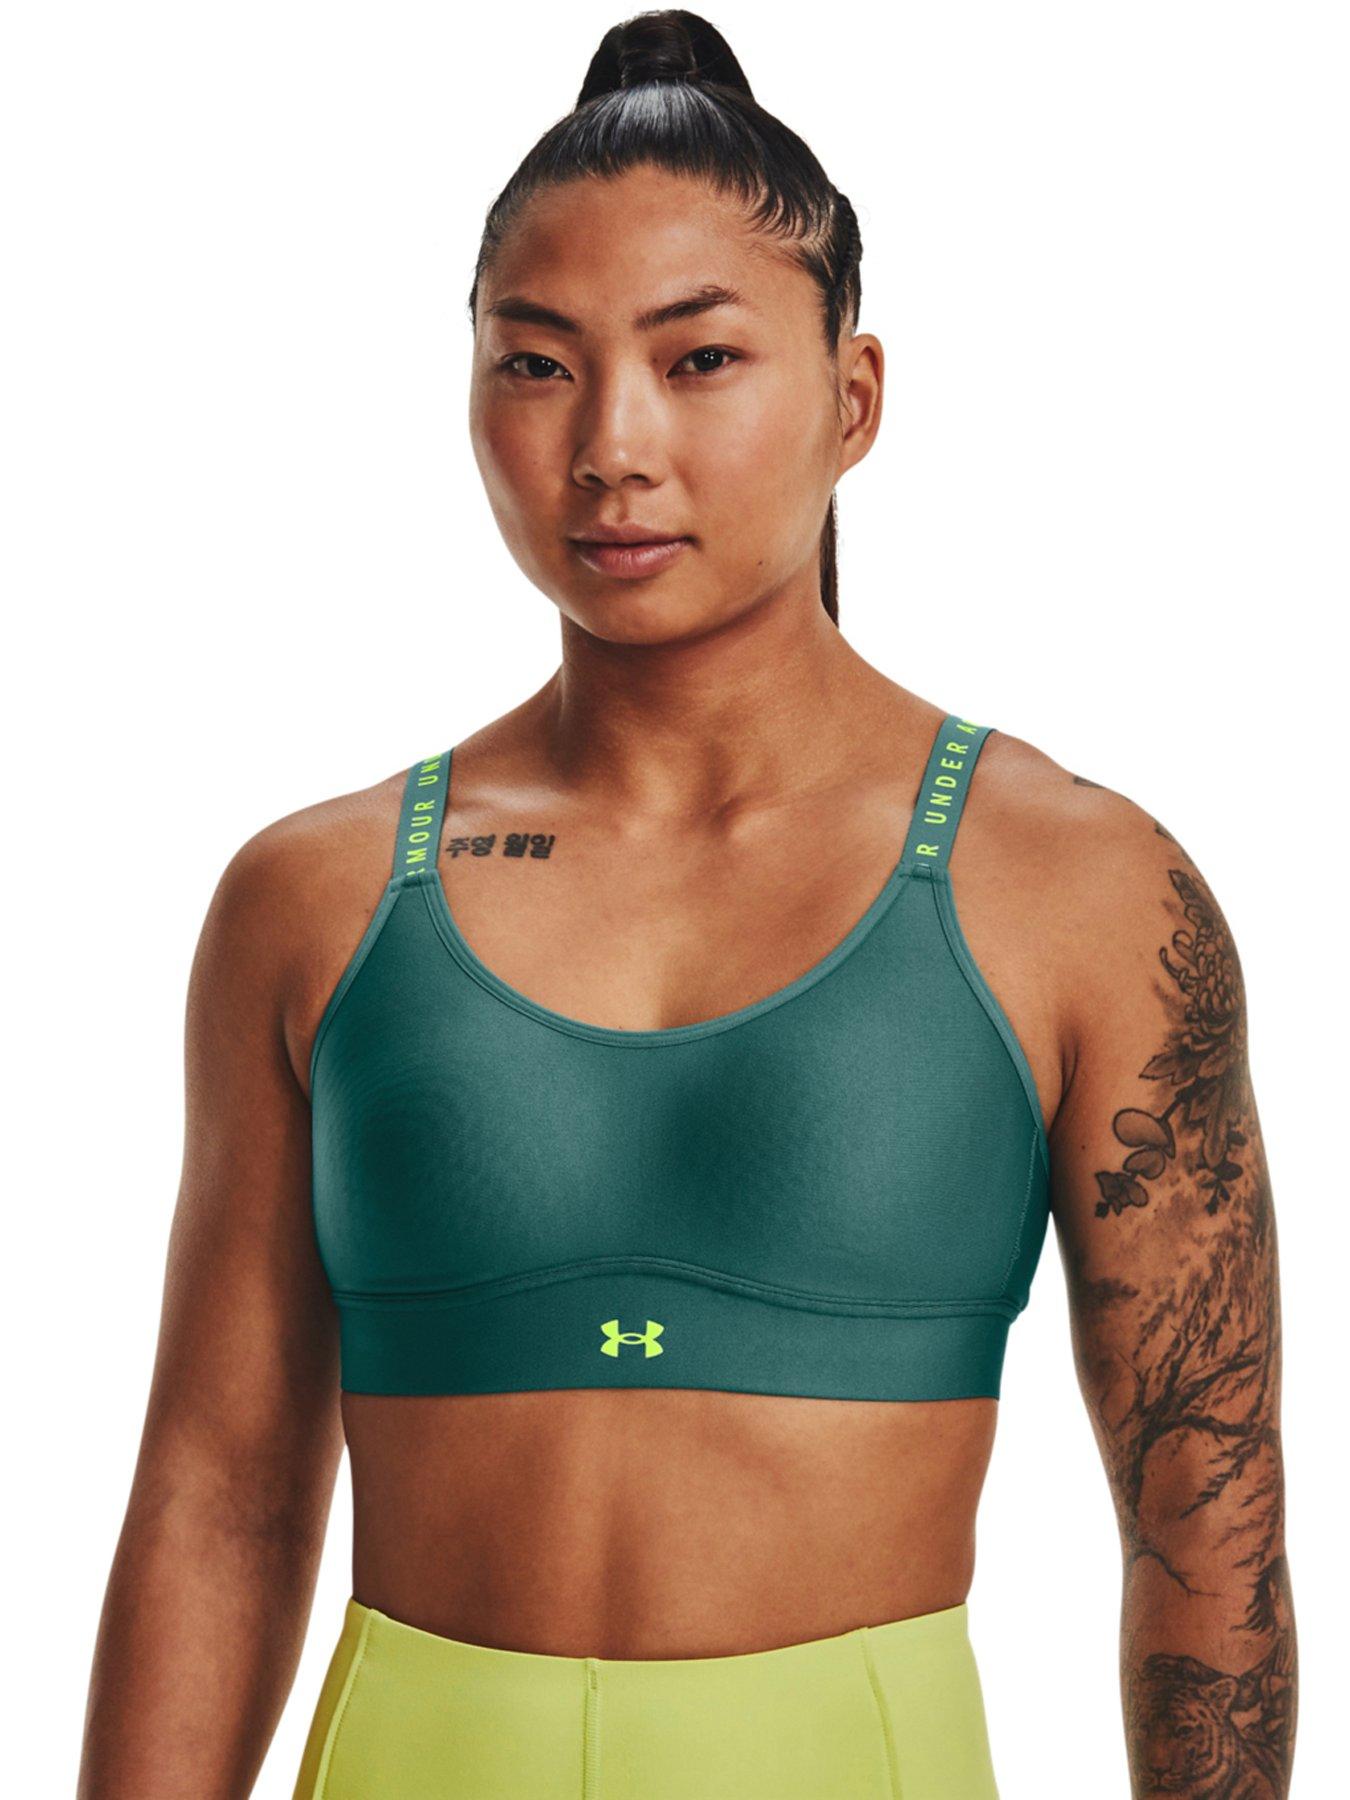 Under Armour - Project Rock Infty Mid Sport Bra